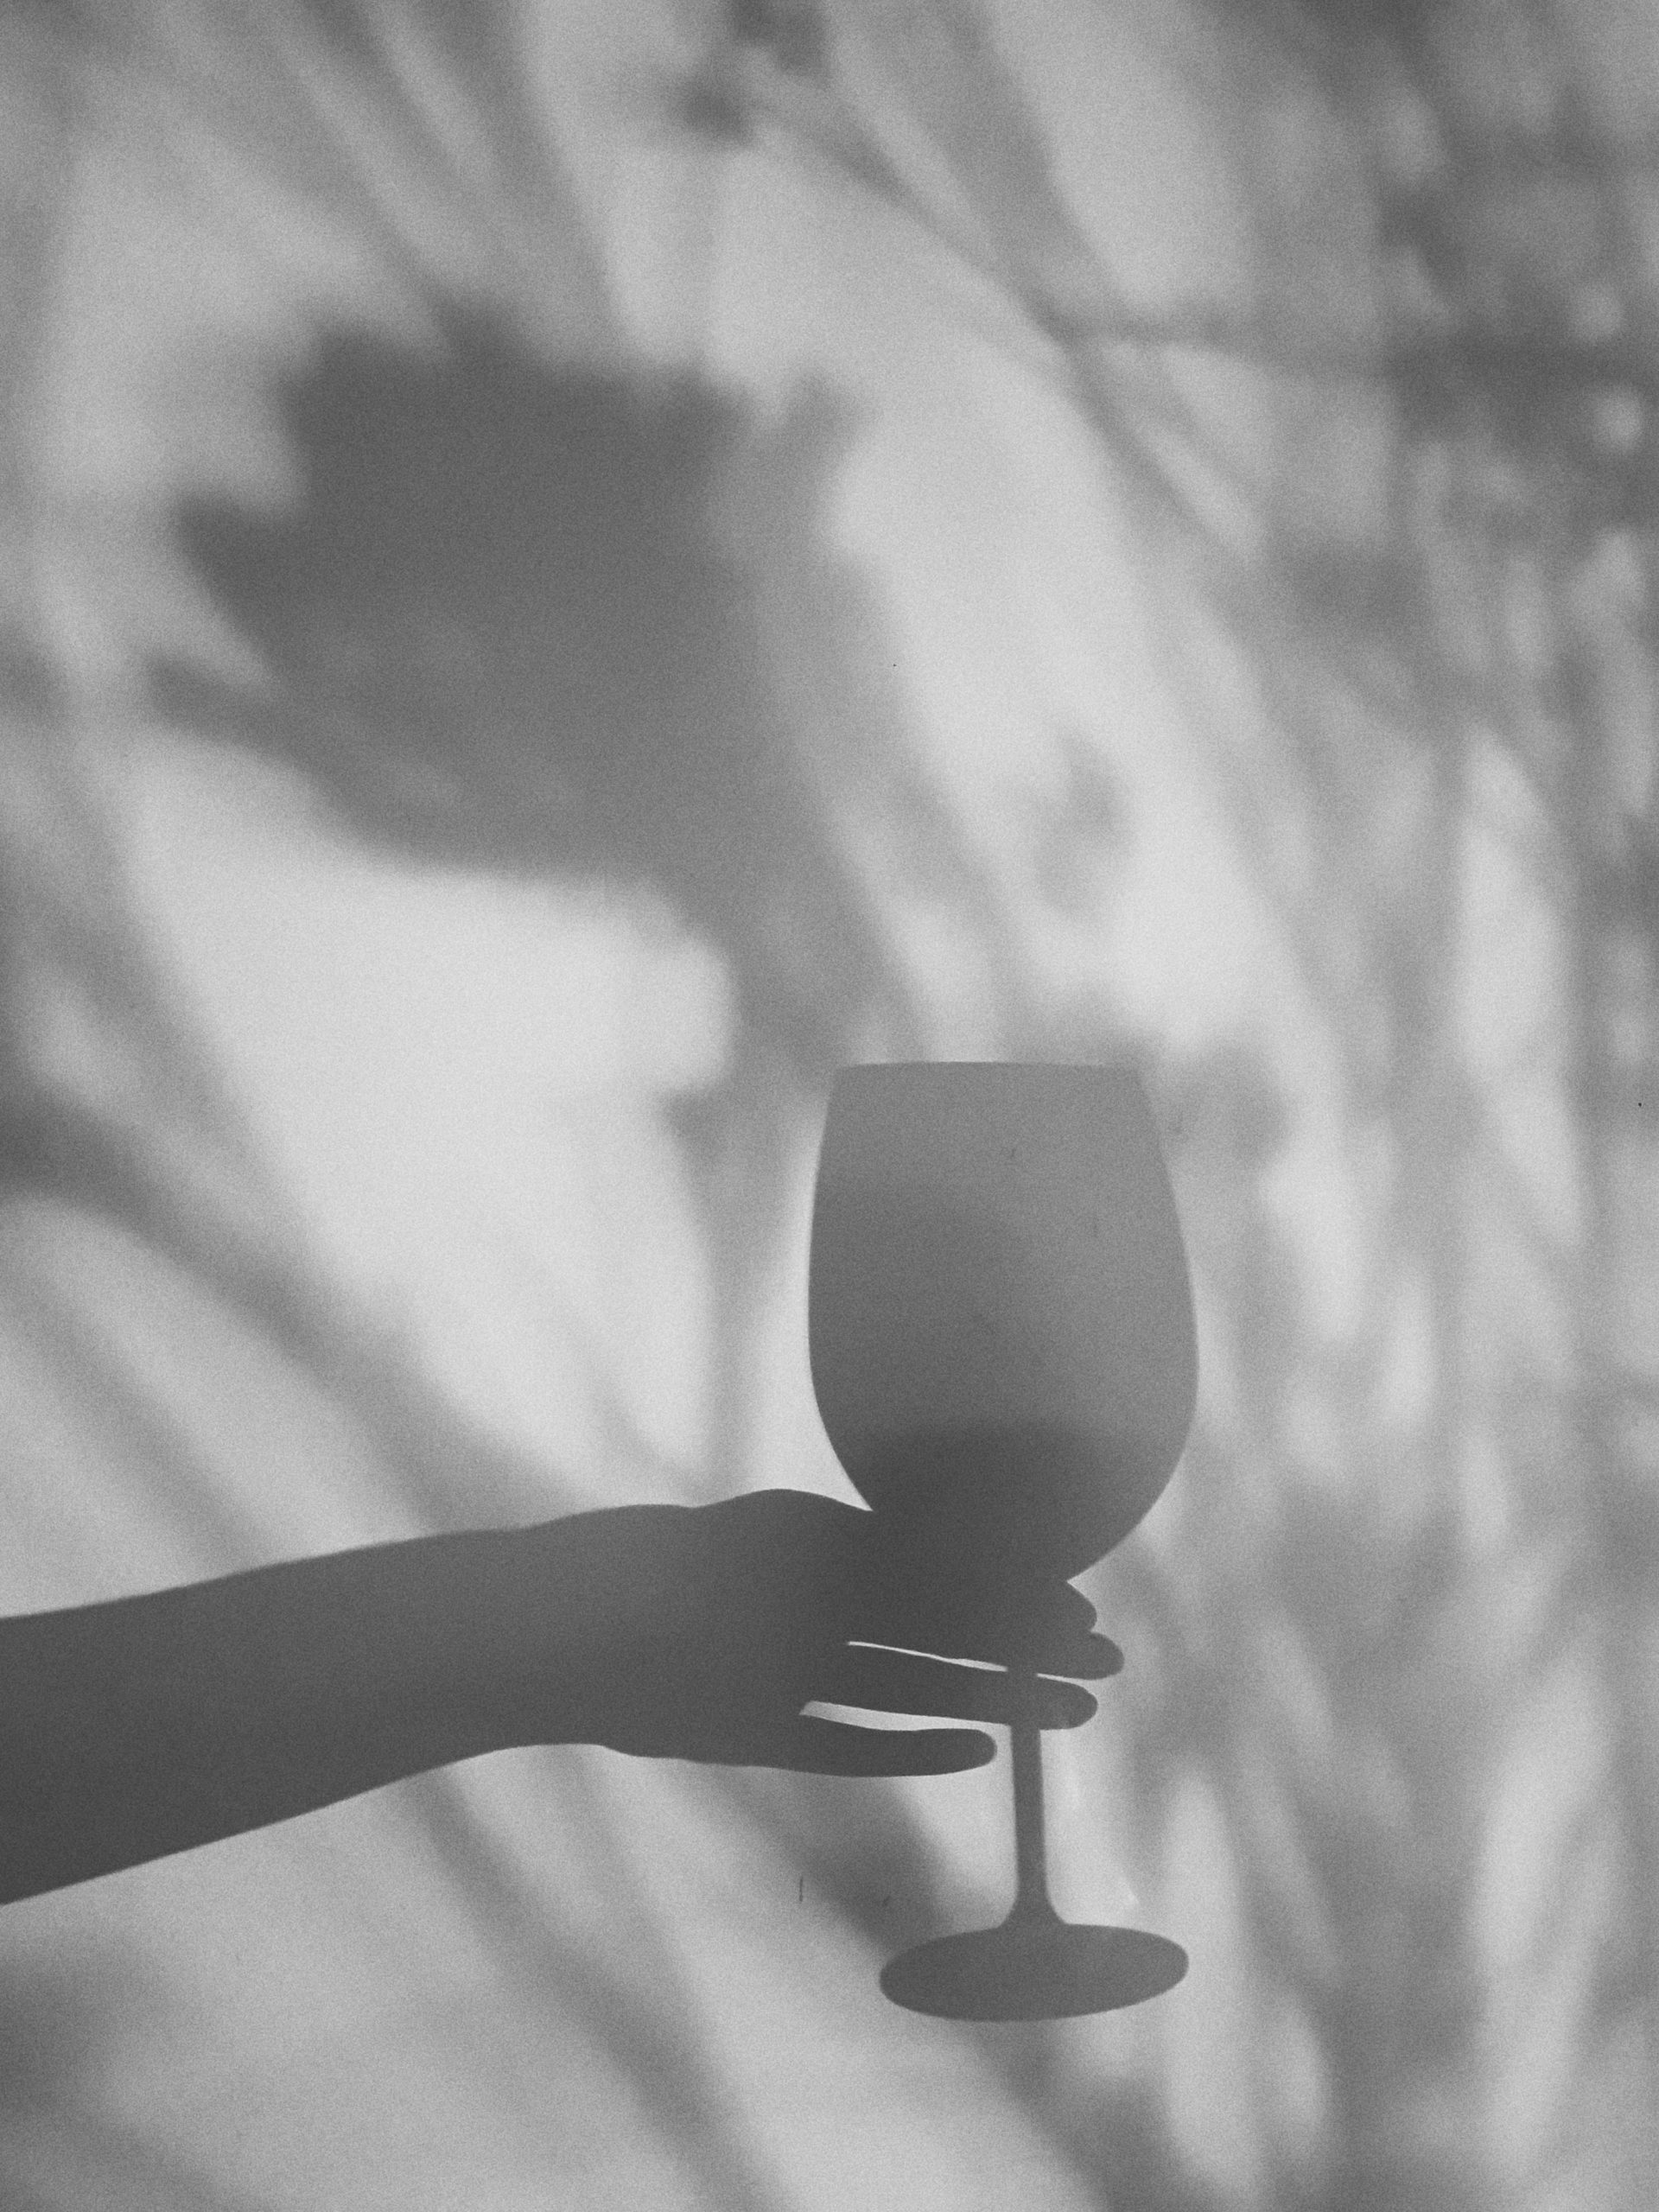 shadow of woman's hand holding a glass of wine